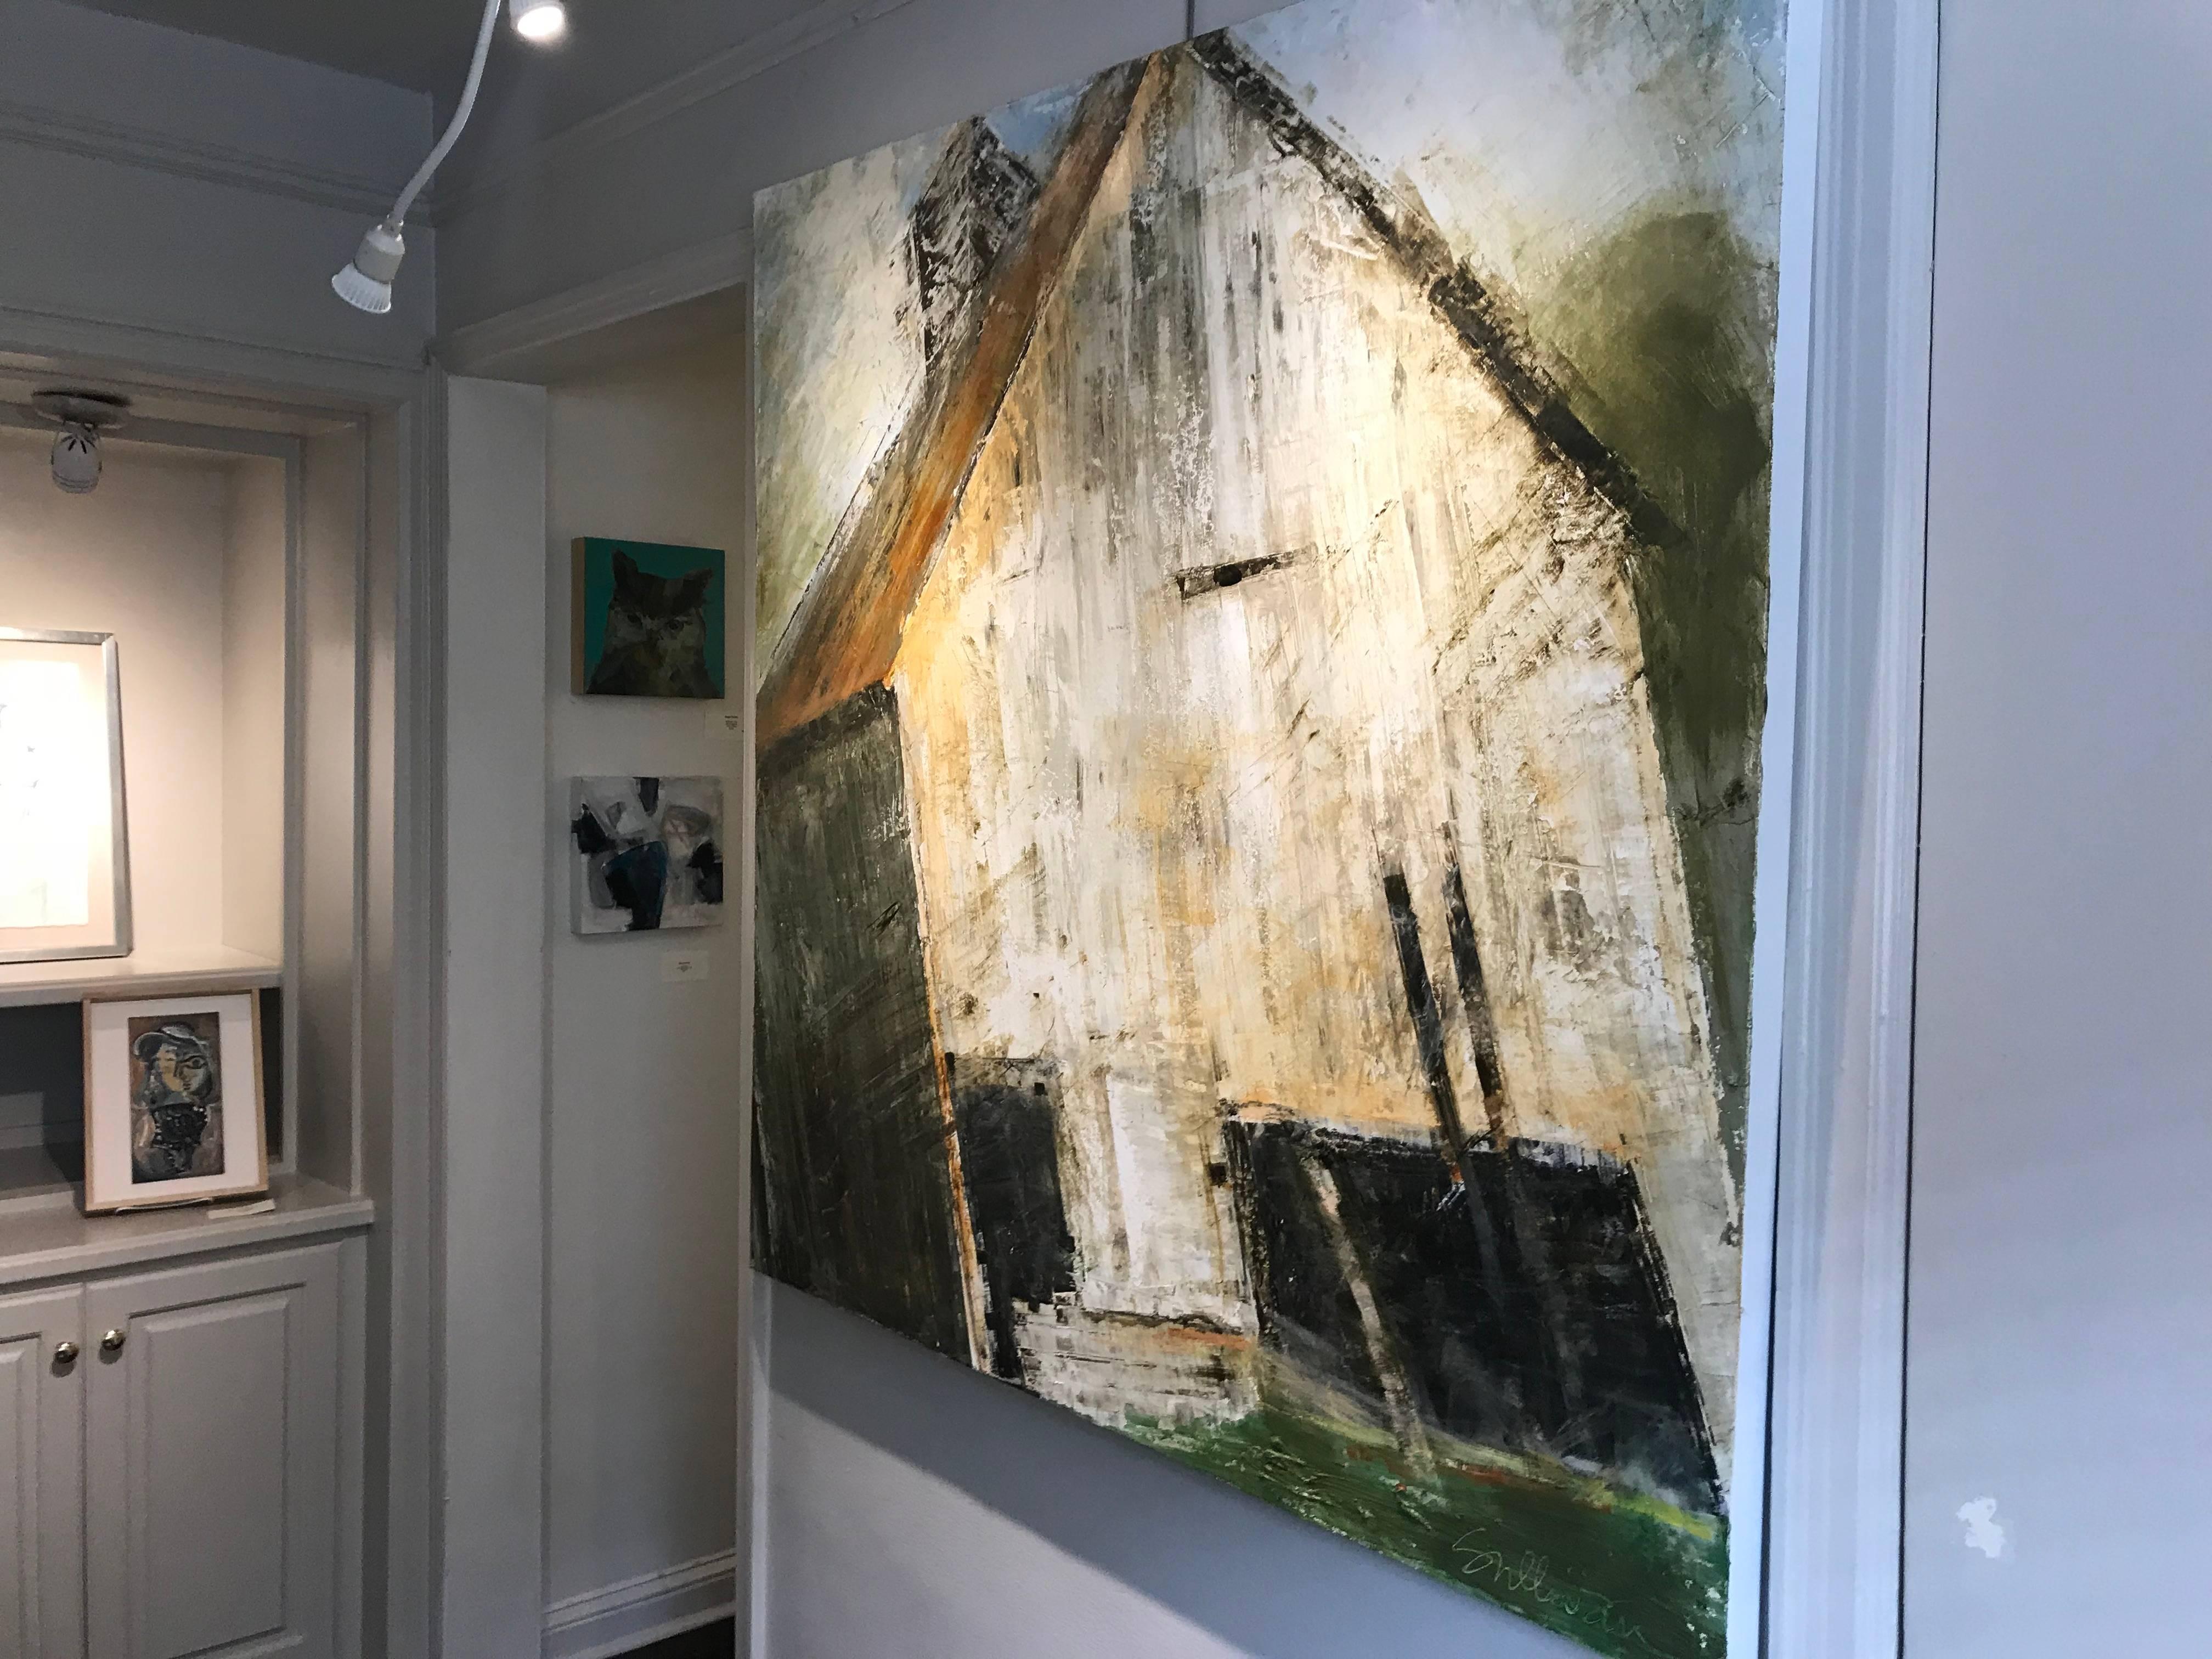 It only took us a second to fall in love with Amy Sullivan's abstracted barns and structures. Oozing with texture and media, her large-scale and slightly off-kilter renditions of the familiar shapes take on a whole new meaning that are